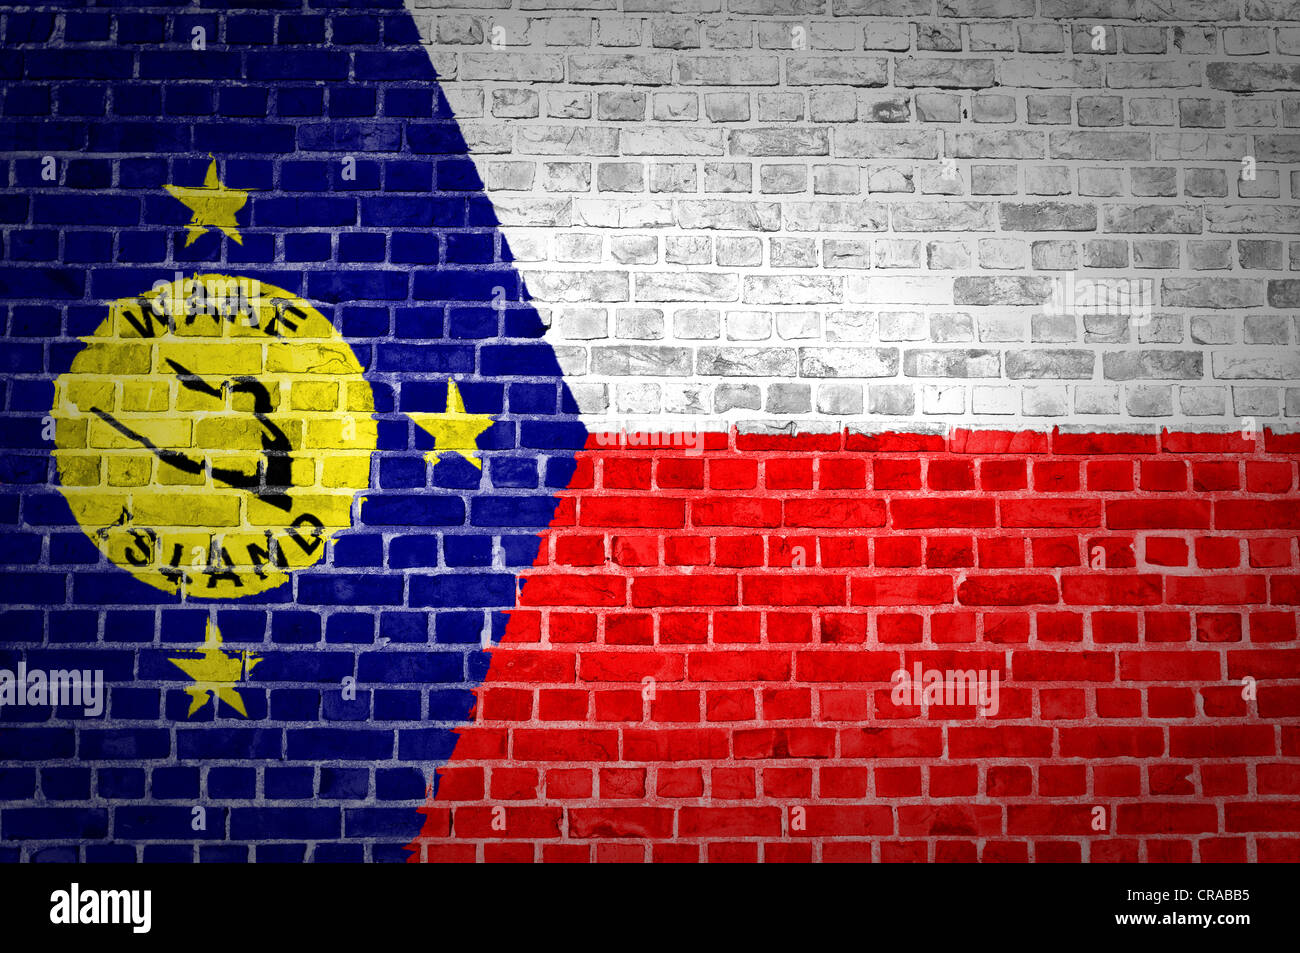 An image of the Wake Island flag painted on a brick wall in an urban location Stock Photo